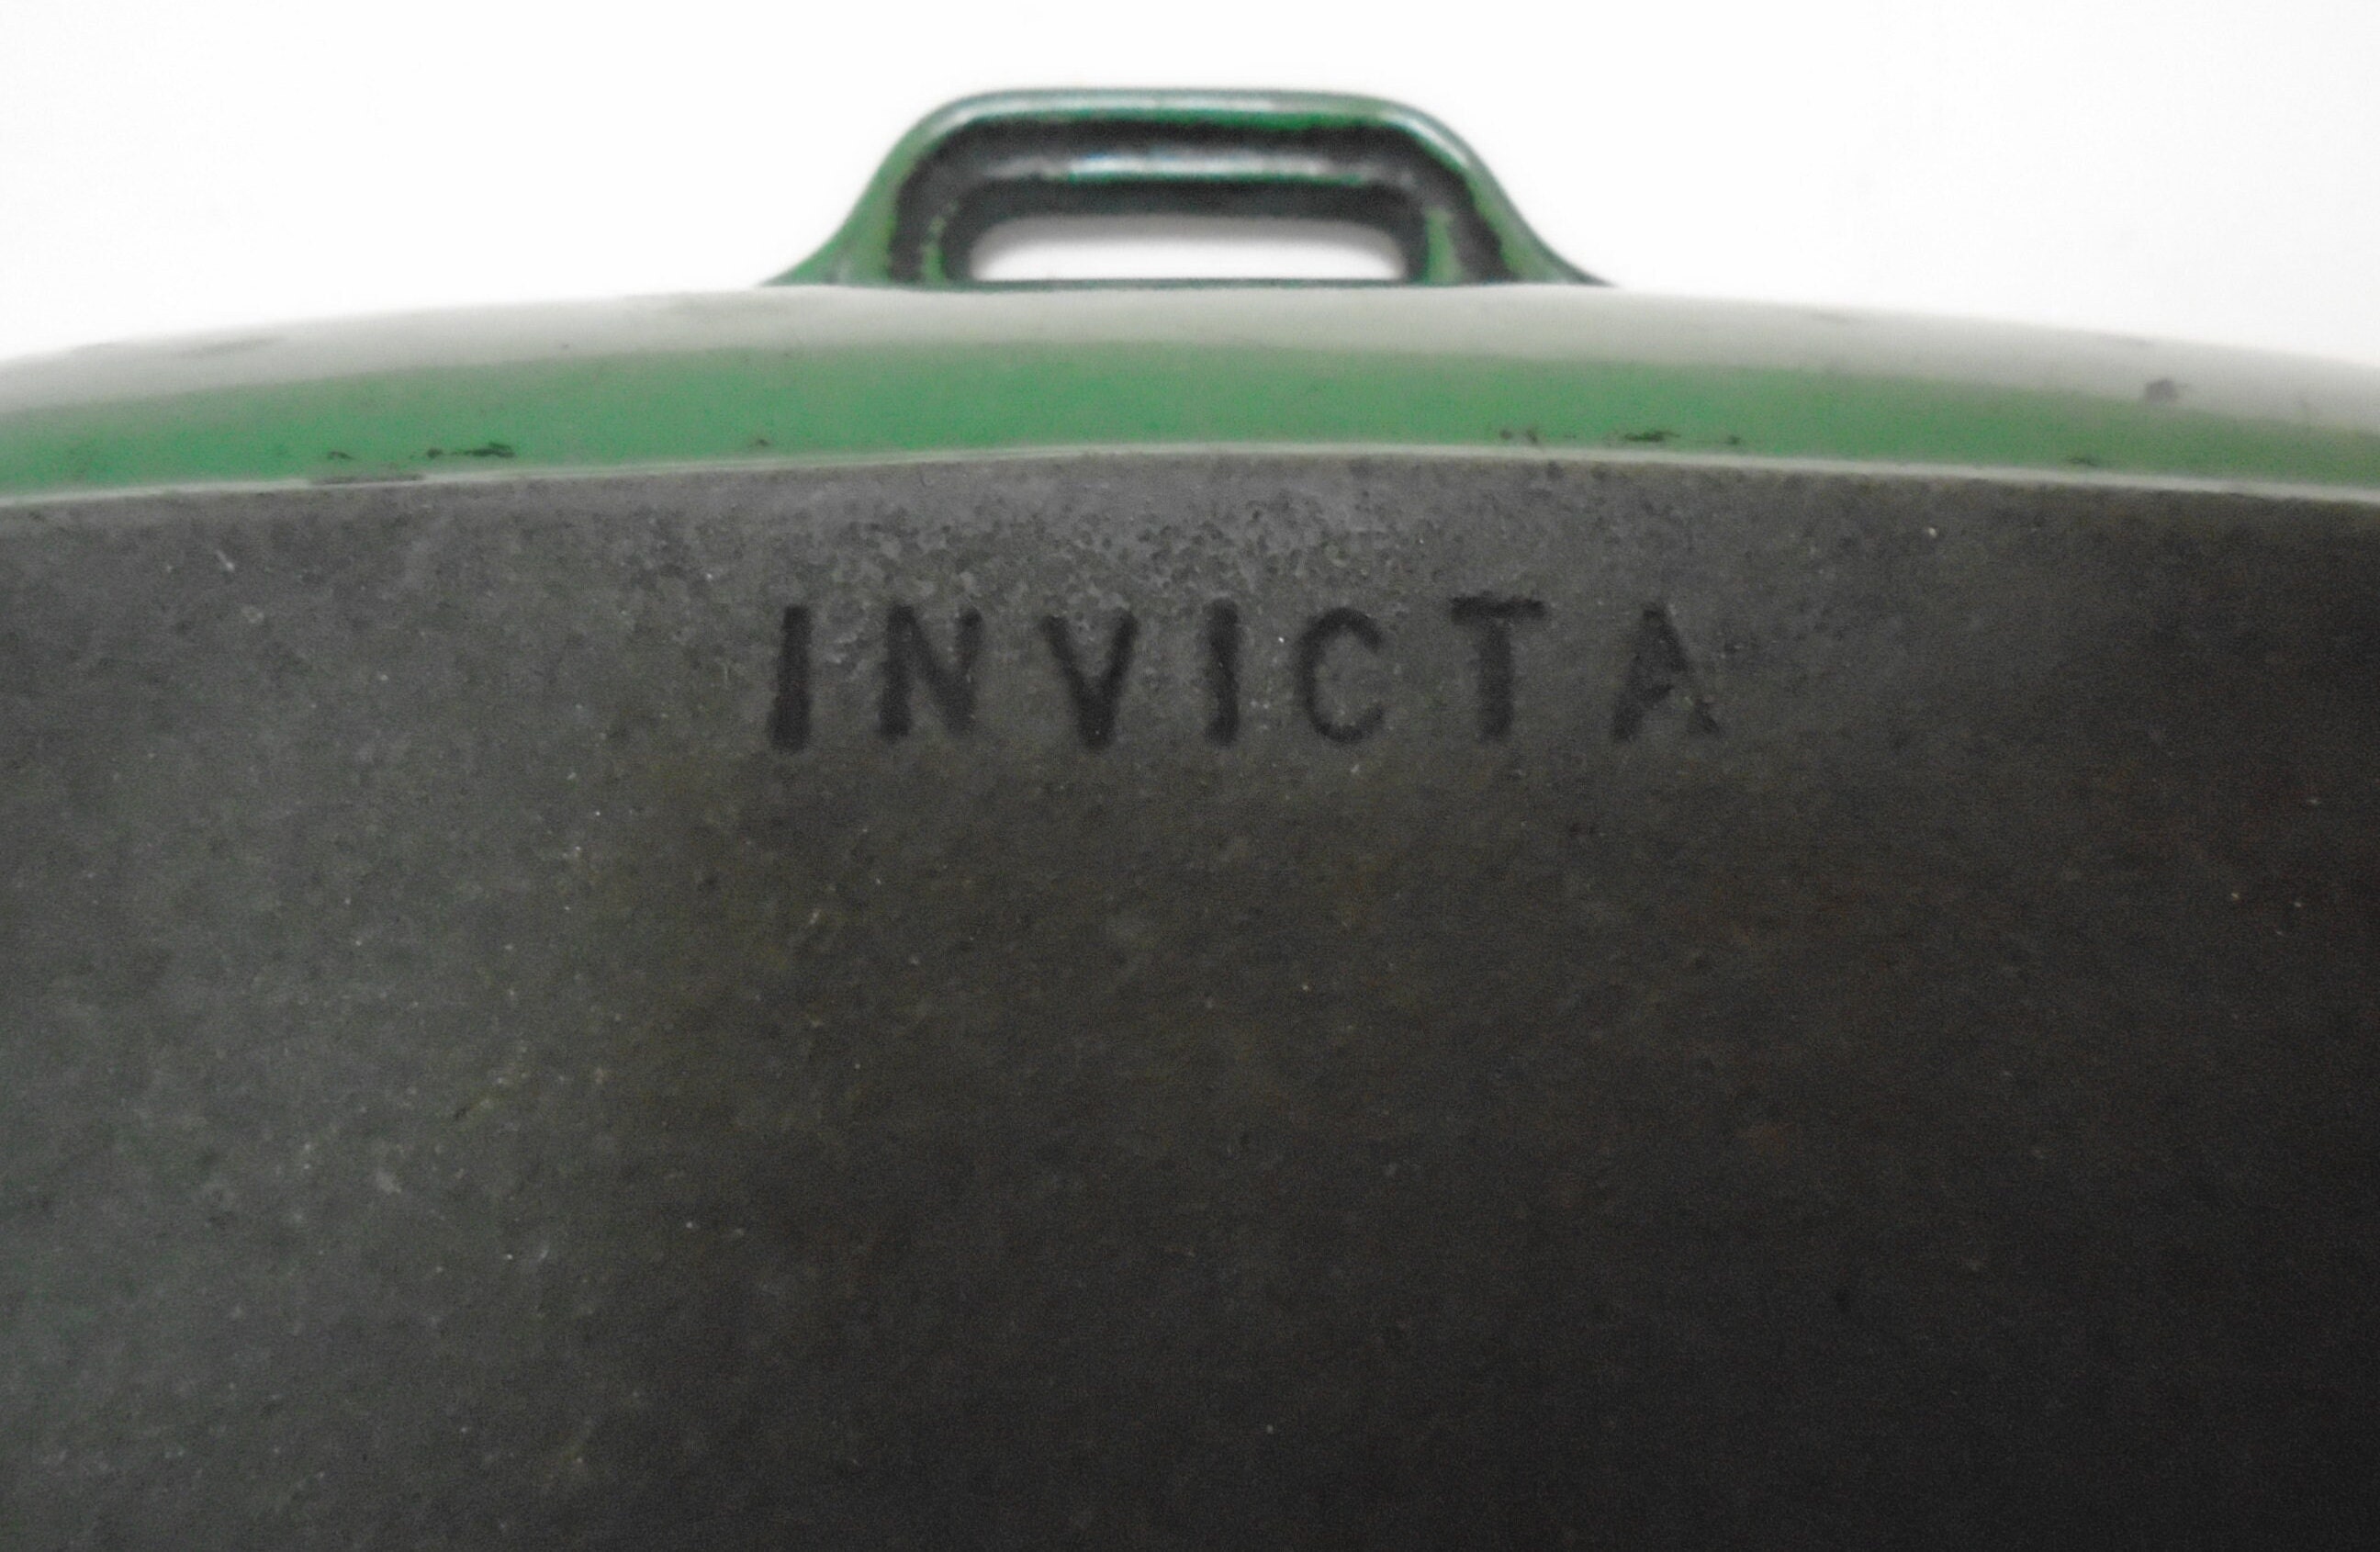 Vintage French INVICTA CHASSEUR Green Enamel Cast Iron Grill -  Norway